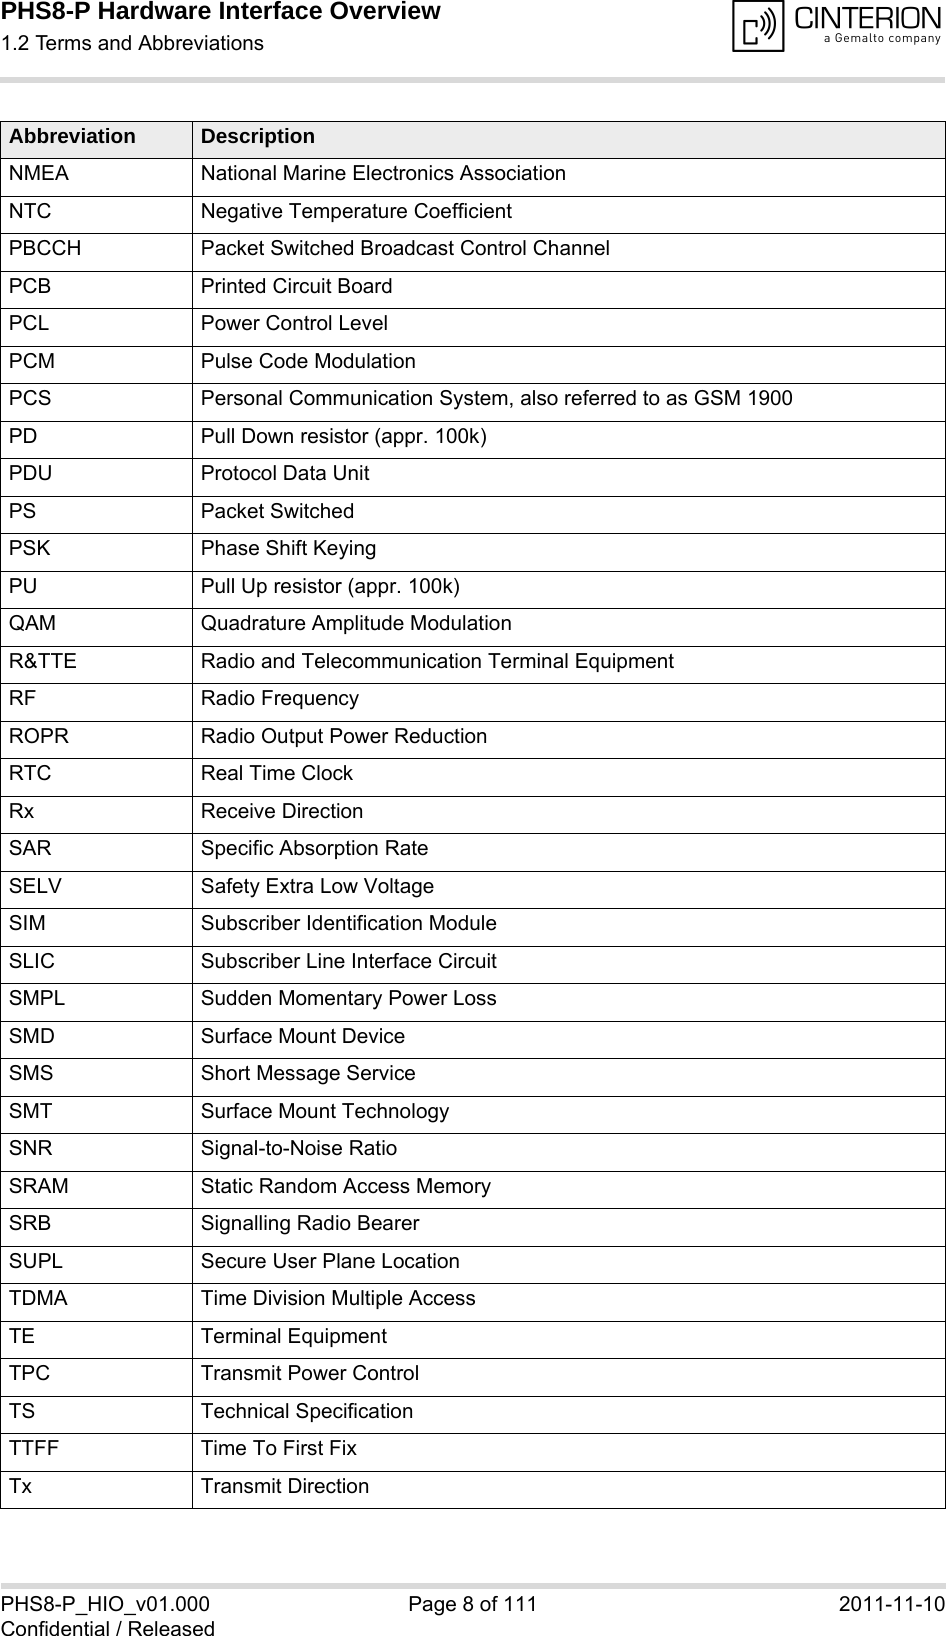 PHS8-P Hardware Interface Overview1.2 Terms and Abbreviations15PHS8-P_HIO_v01.000 Page 8 of 111 2011-11-10Confidential / ReleasedNMEA National Marine Electronics AssociationNTC Negative Temperature CoefficientPBCCH Packet Switched Broadcast Control ChannelPCB Printed Circuit BoardPCL Power Control LevelPCM Pulse Code ModulationPCS Personal Communication System, also referred to as GSM 1900PD Pull Down resistor (appr. 100k)PDU Protocol Data UnitPS Packet SwitchedPSK Phase Shift KeyingPU Pull Up resistor (appr. 100k)QAM Quadrature Amplitude ModulationR&amp;TTE Radio and Telecommunication Terminal EquipmentRF Radio FrequencyROPR Radio Output Power ReductionRTC Real Time ClockRx Receive DirectionSAR Specific Absorption RateSELV Safety Extra Low VoltageSIM Subscriber Identification ModuleSLIC Subscriber Line Interface Circuit SMPL Sudden Momentary Power LossSMD Surface Mount DeviceSMS Short Message ServiceSMT Surface Mount TechnologySNR Signal-to-Noise RatioSRAM Static Random Access MemorySRB Signalling Radio BearerSUPL Secure User Plane LocationTDMA Time Division Multiple AccessTE Terminal EquipmentTPC Transmit Power ControlTS Technical SpecificationTTFF Time To First FixTx Transmit DirectionAbbreviation Description